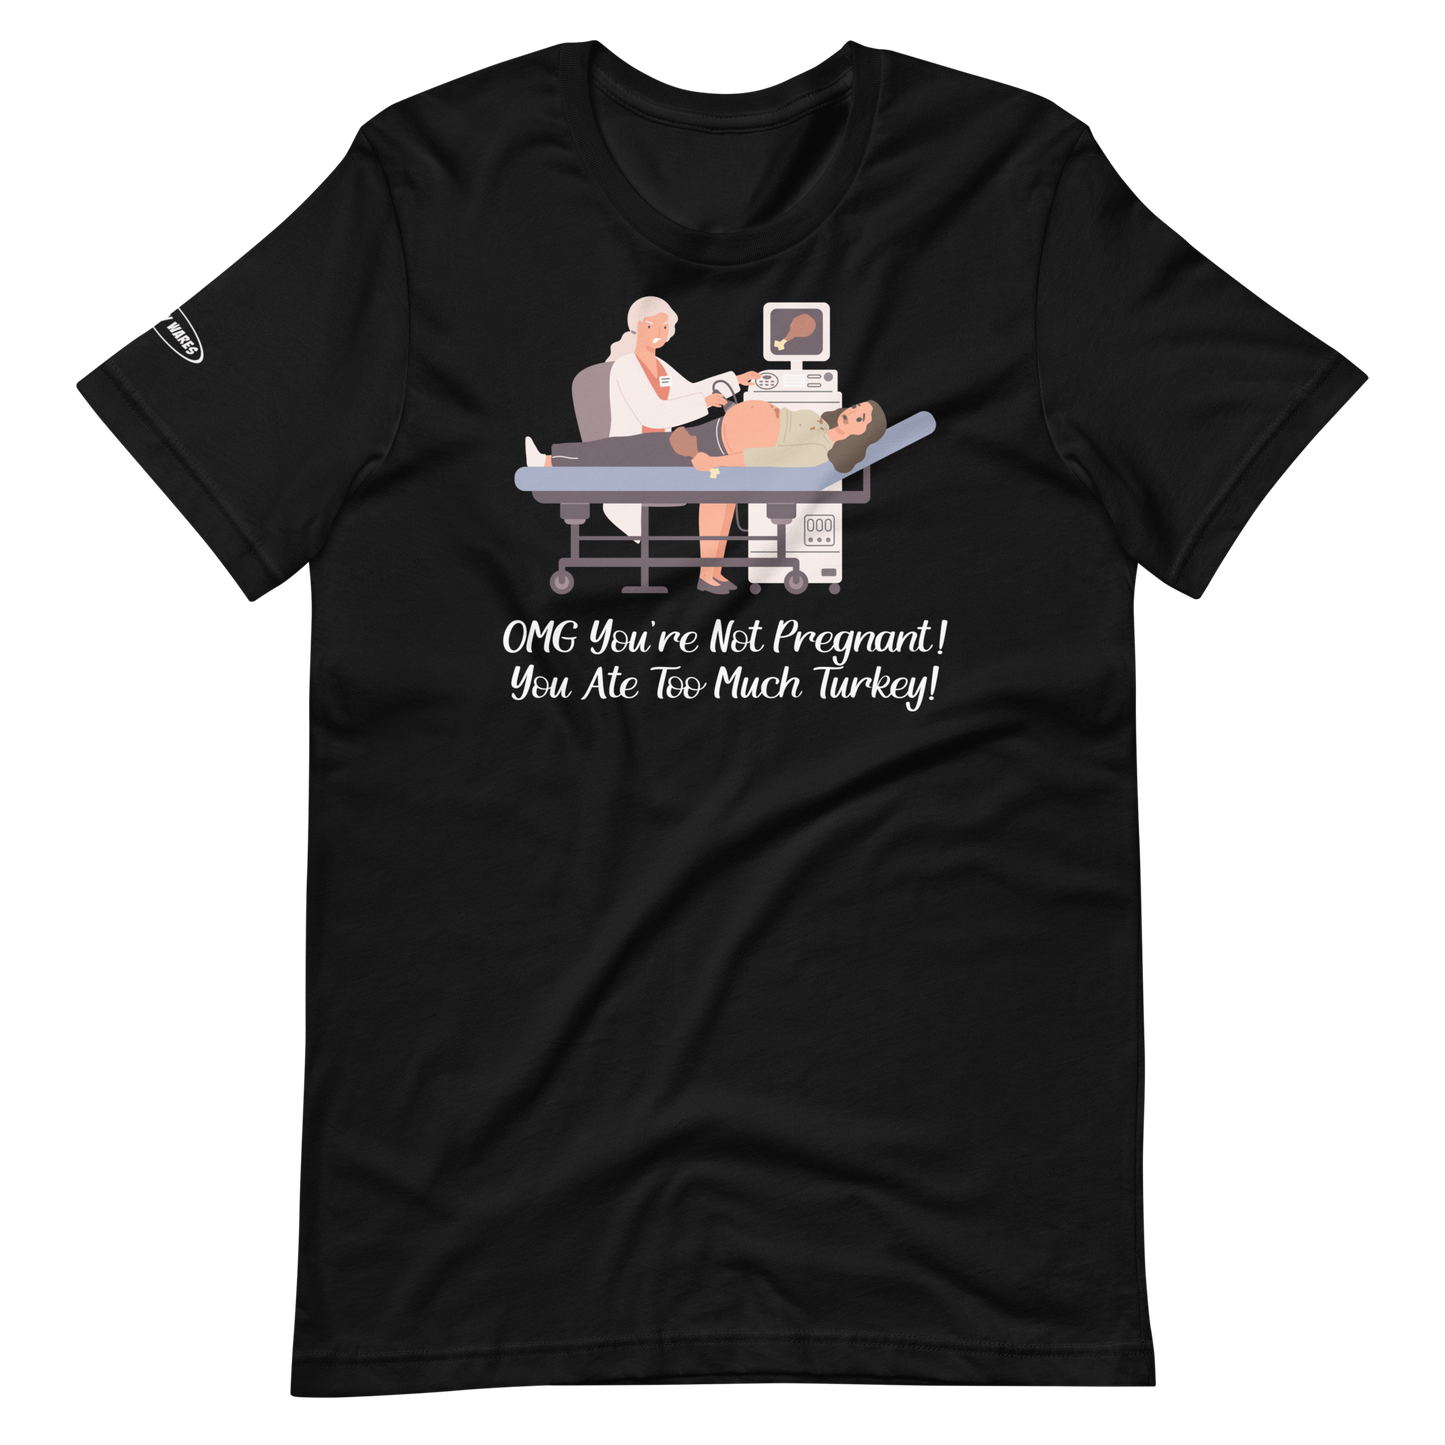 THANKSGIVING - Not pregnant, just ate a lot of turkey - Funny t-shirt